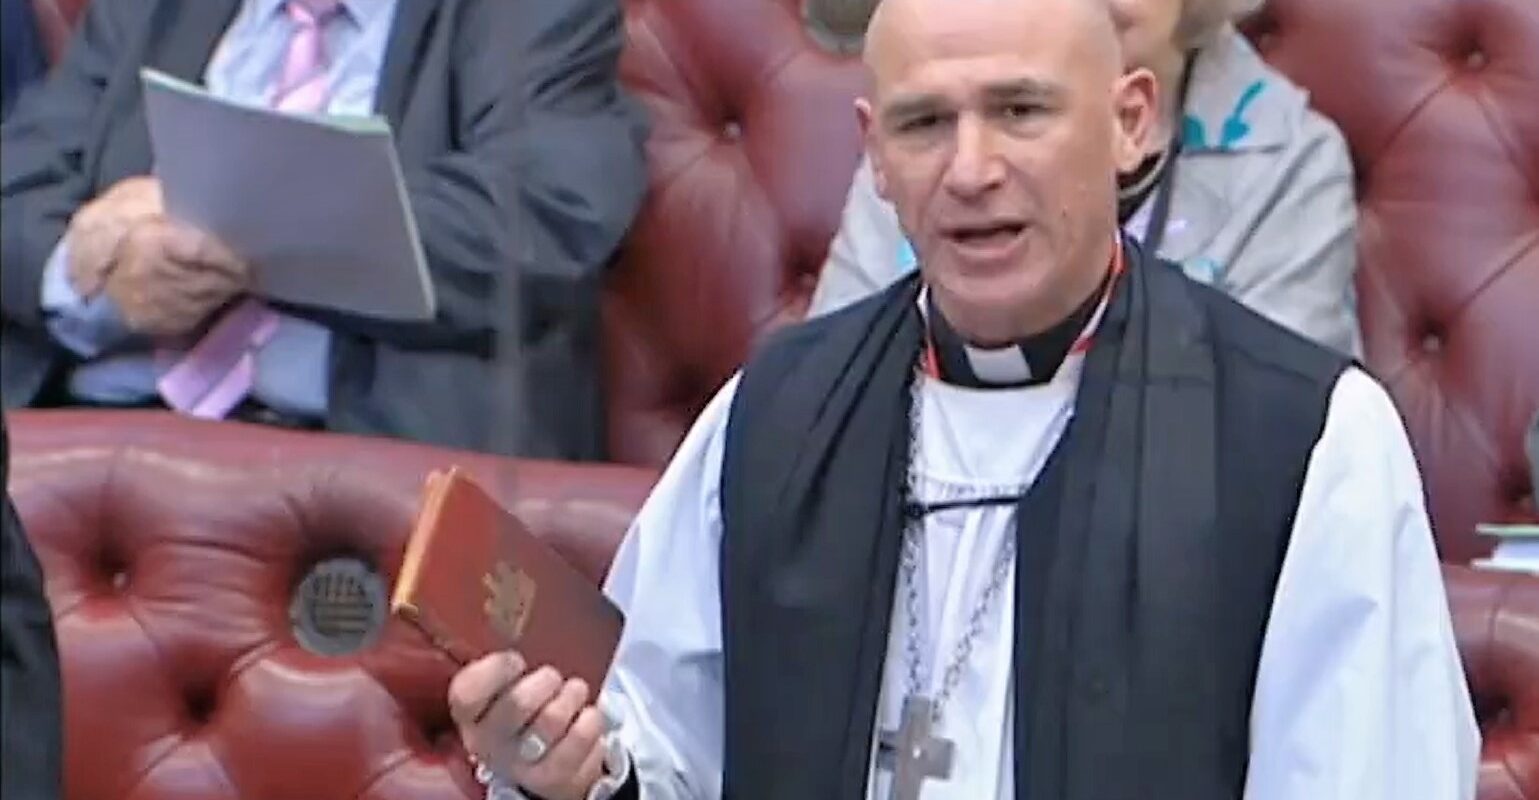 Bishop Pete in House of Lords